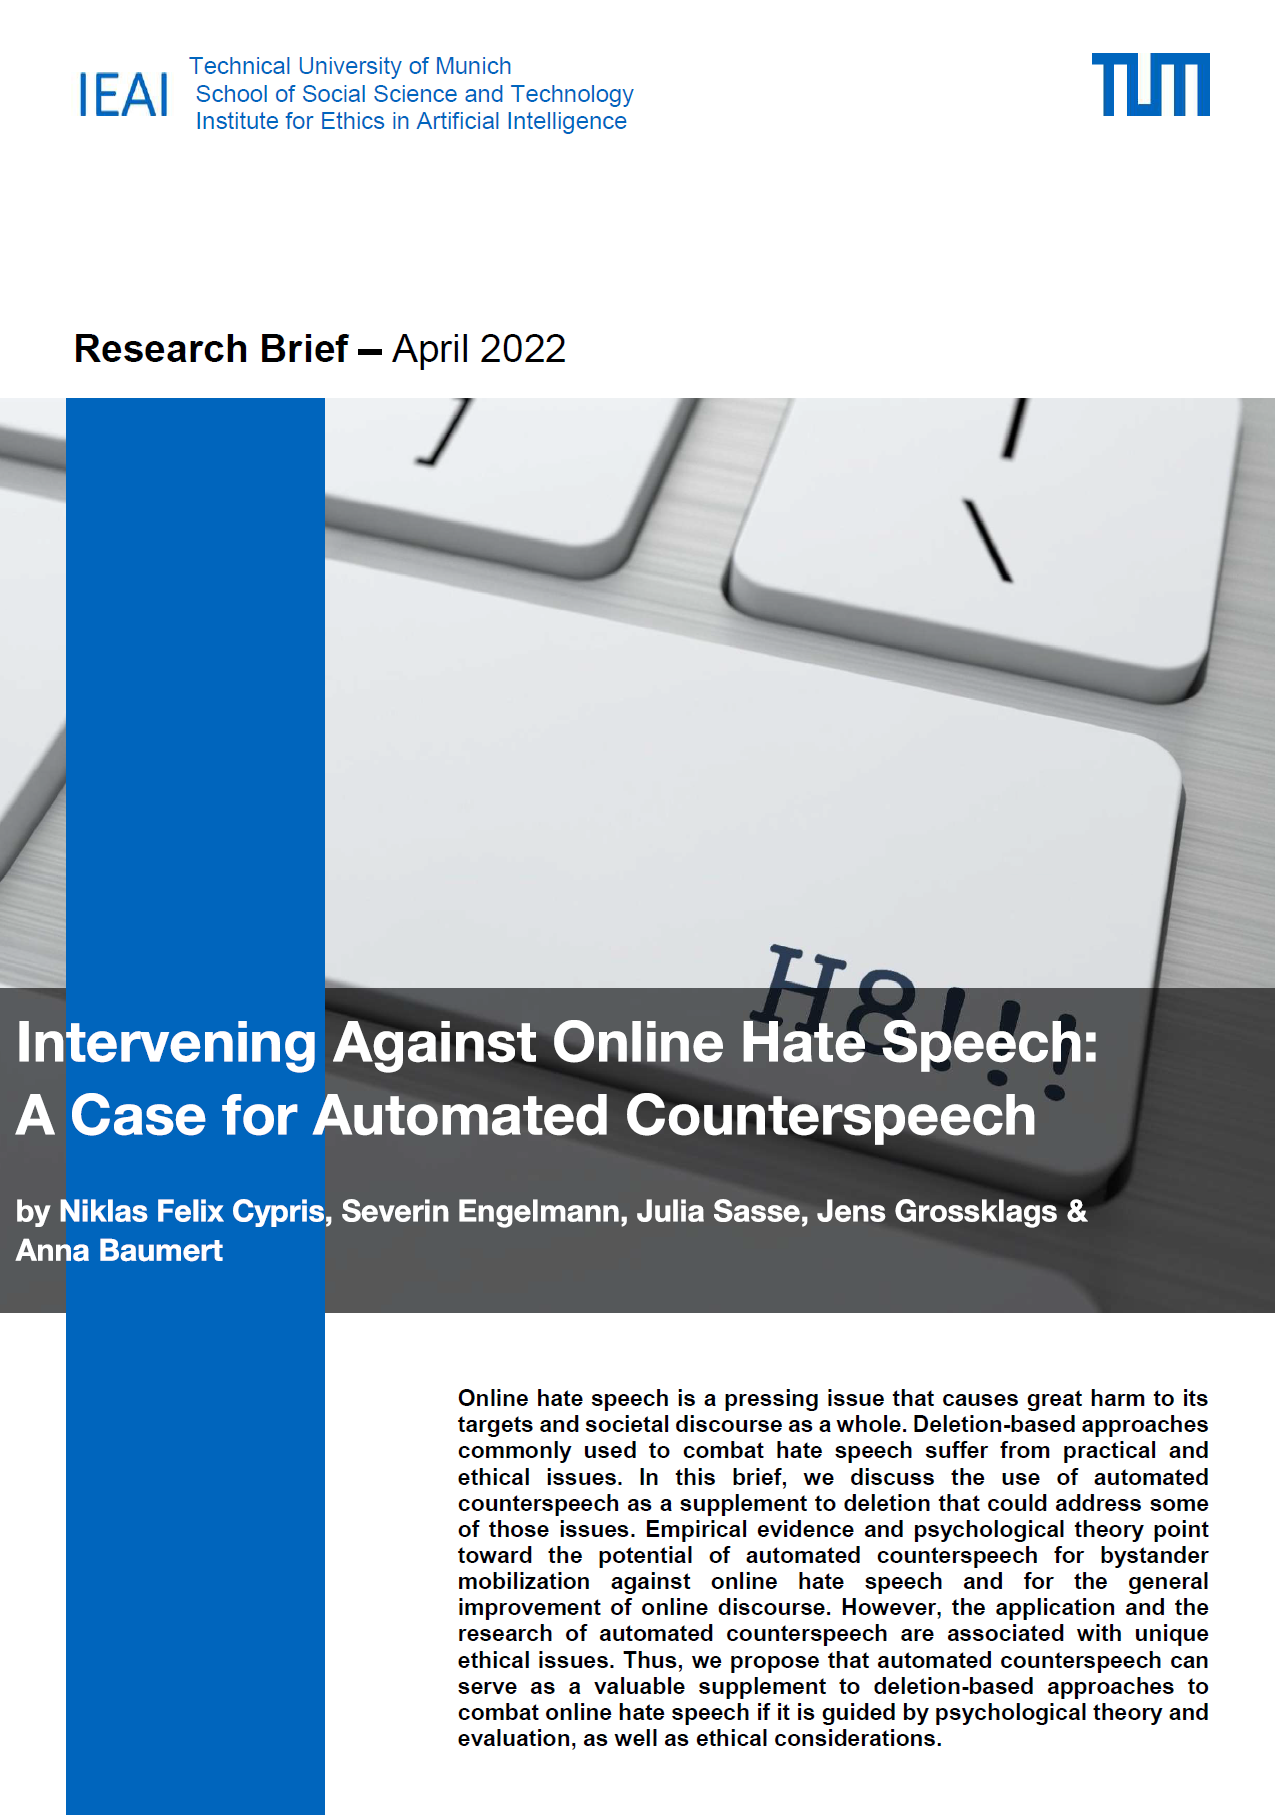 April 2022 IEAI – Research Brief: Intervening Against Online Hate Speech: A Case for Automated Counterspeech